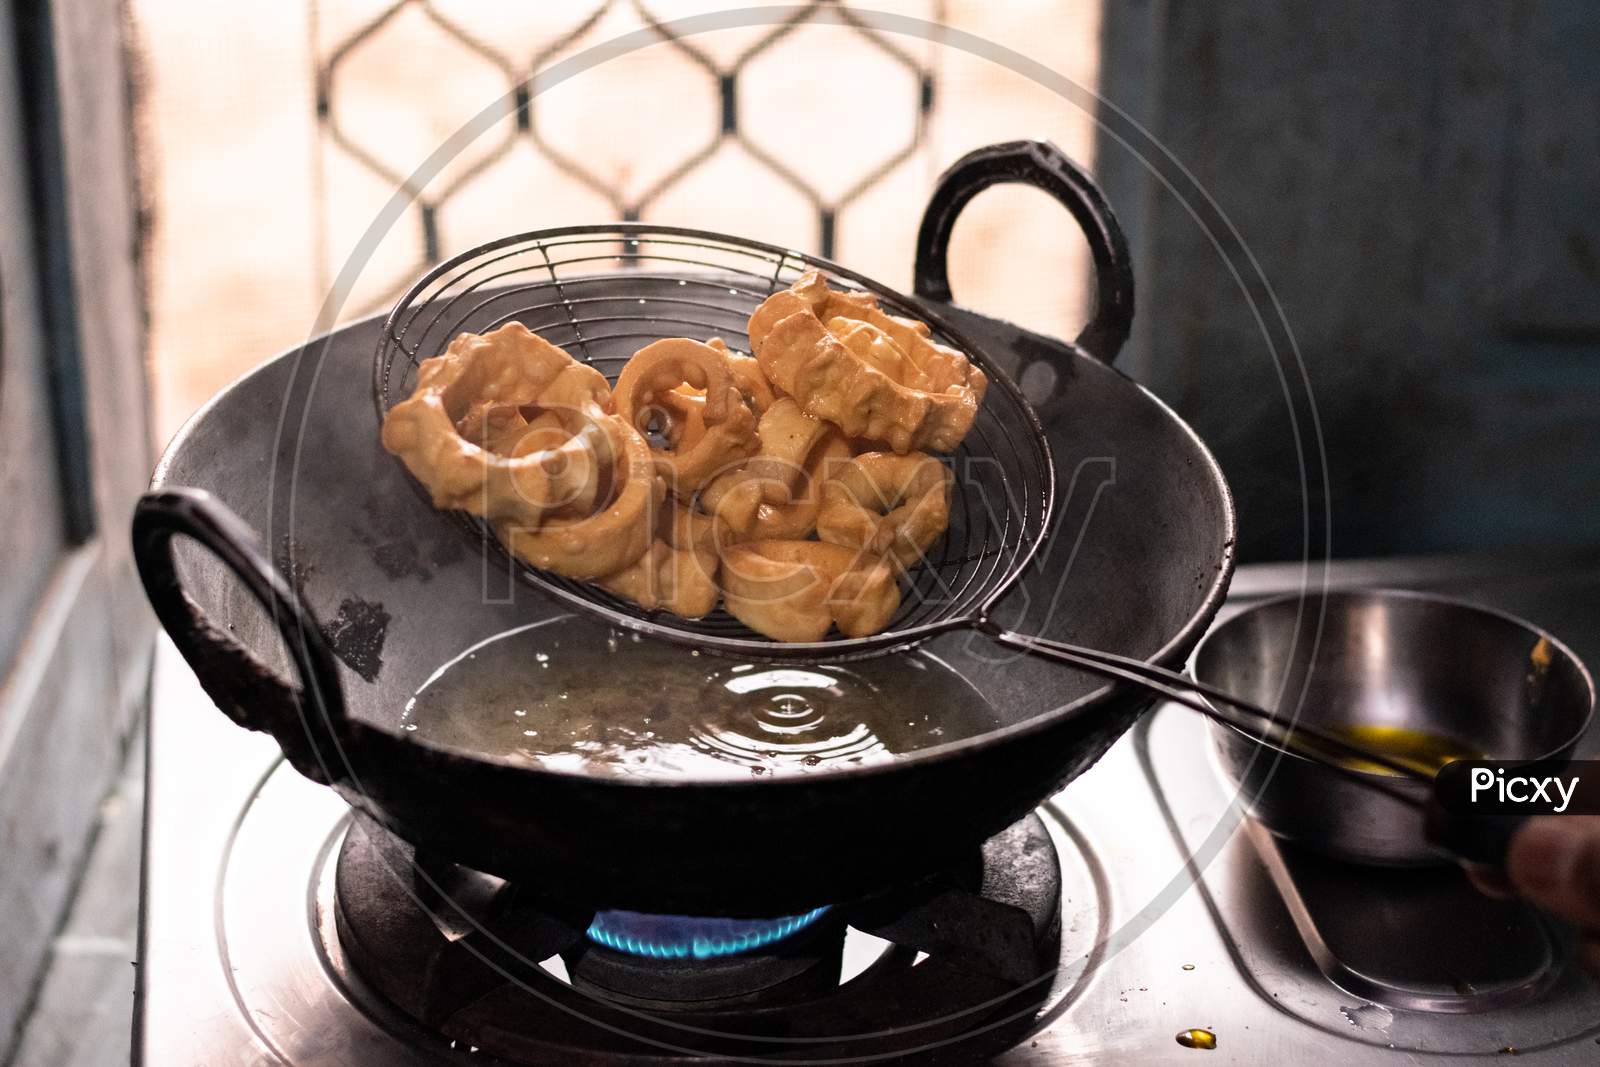 Indian Traditional Sweet Named Malpua Cooking in Hot Oil in Kadai (Frying  Pan). This Delicious Dessert is Famous in Ajmer - Rajasthan, India. Stock  Photo